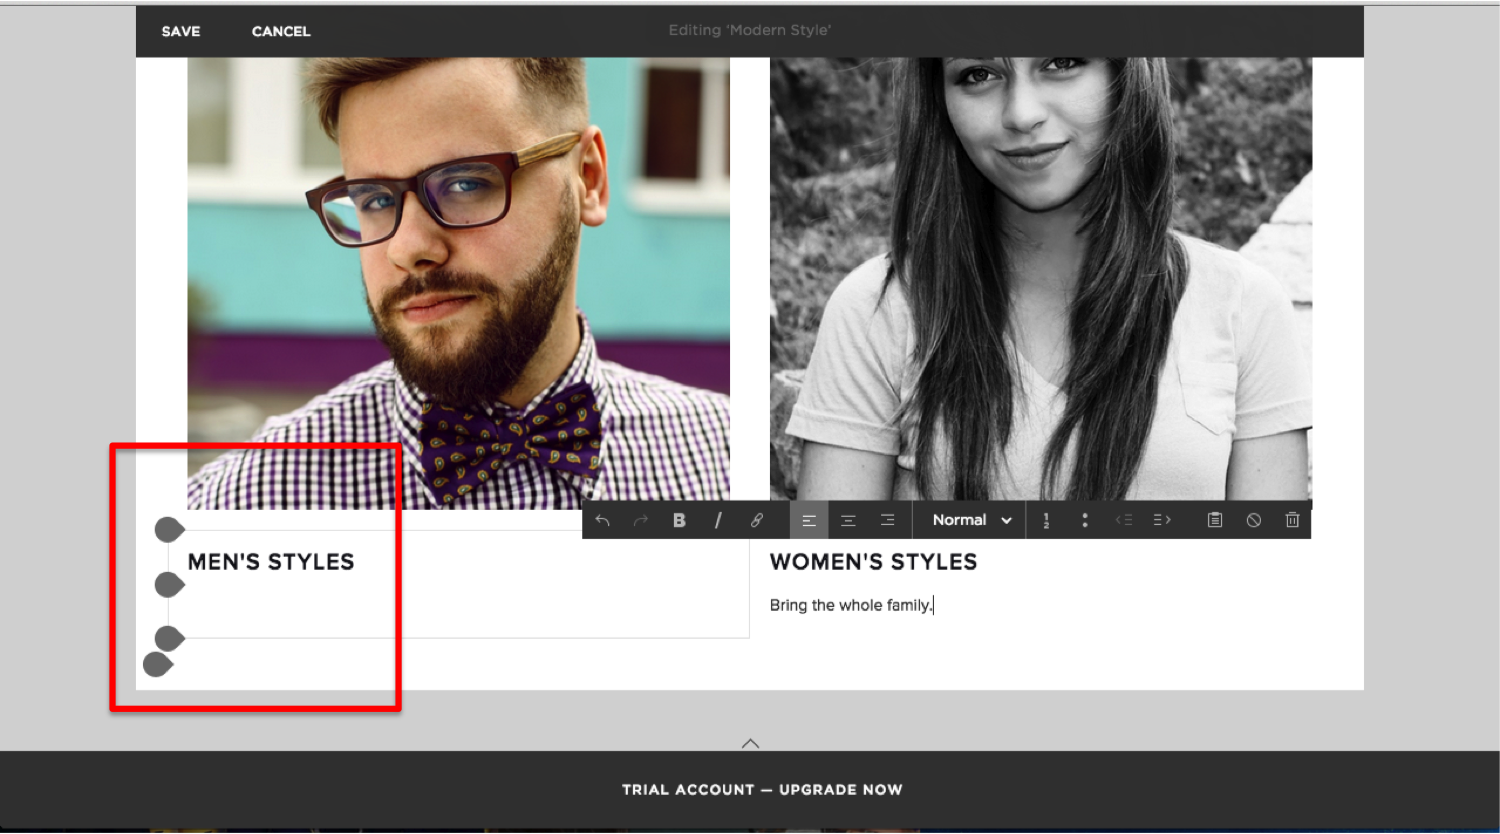 Screenshot of the squarespace.com edit titles page